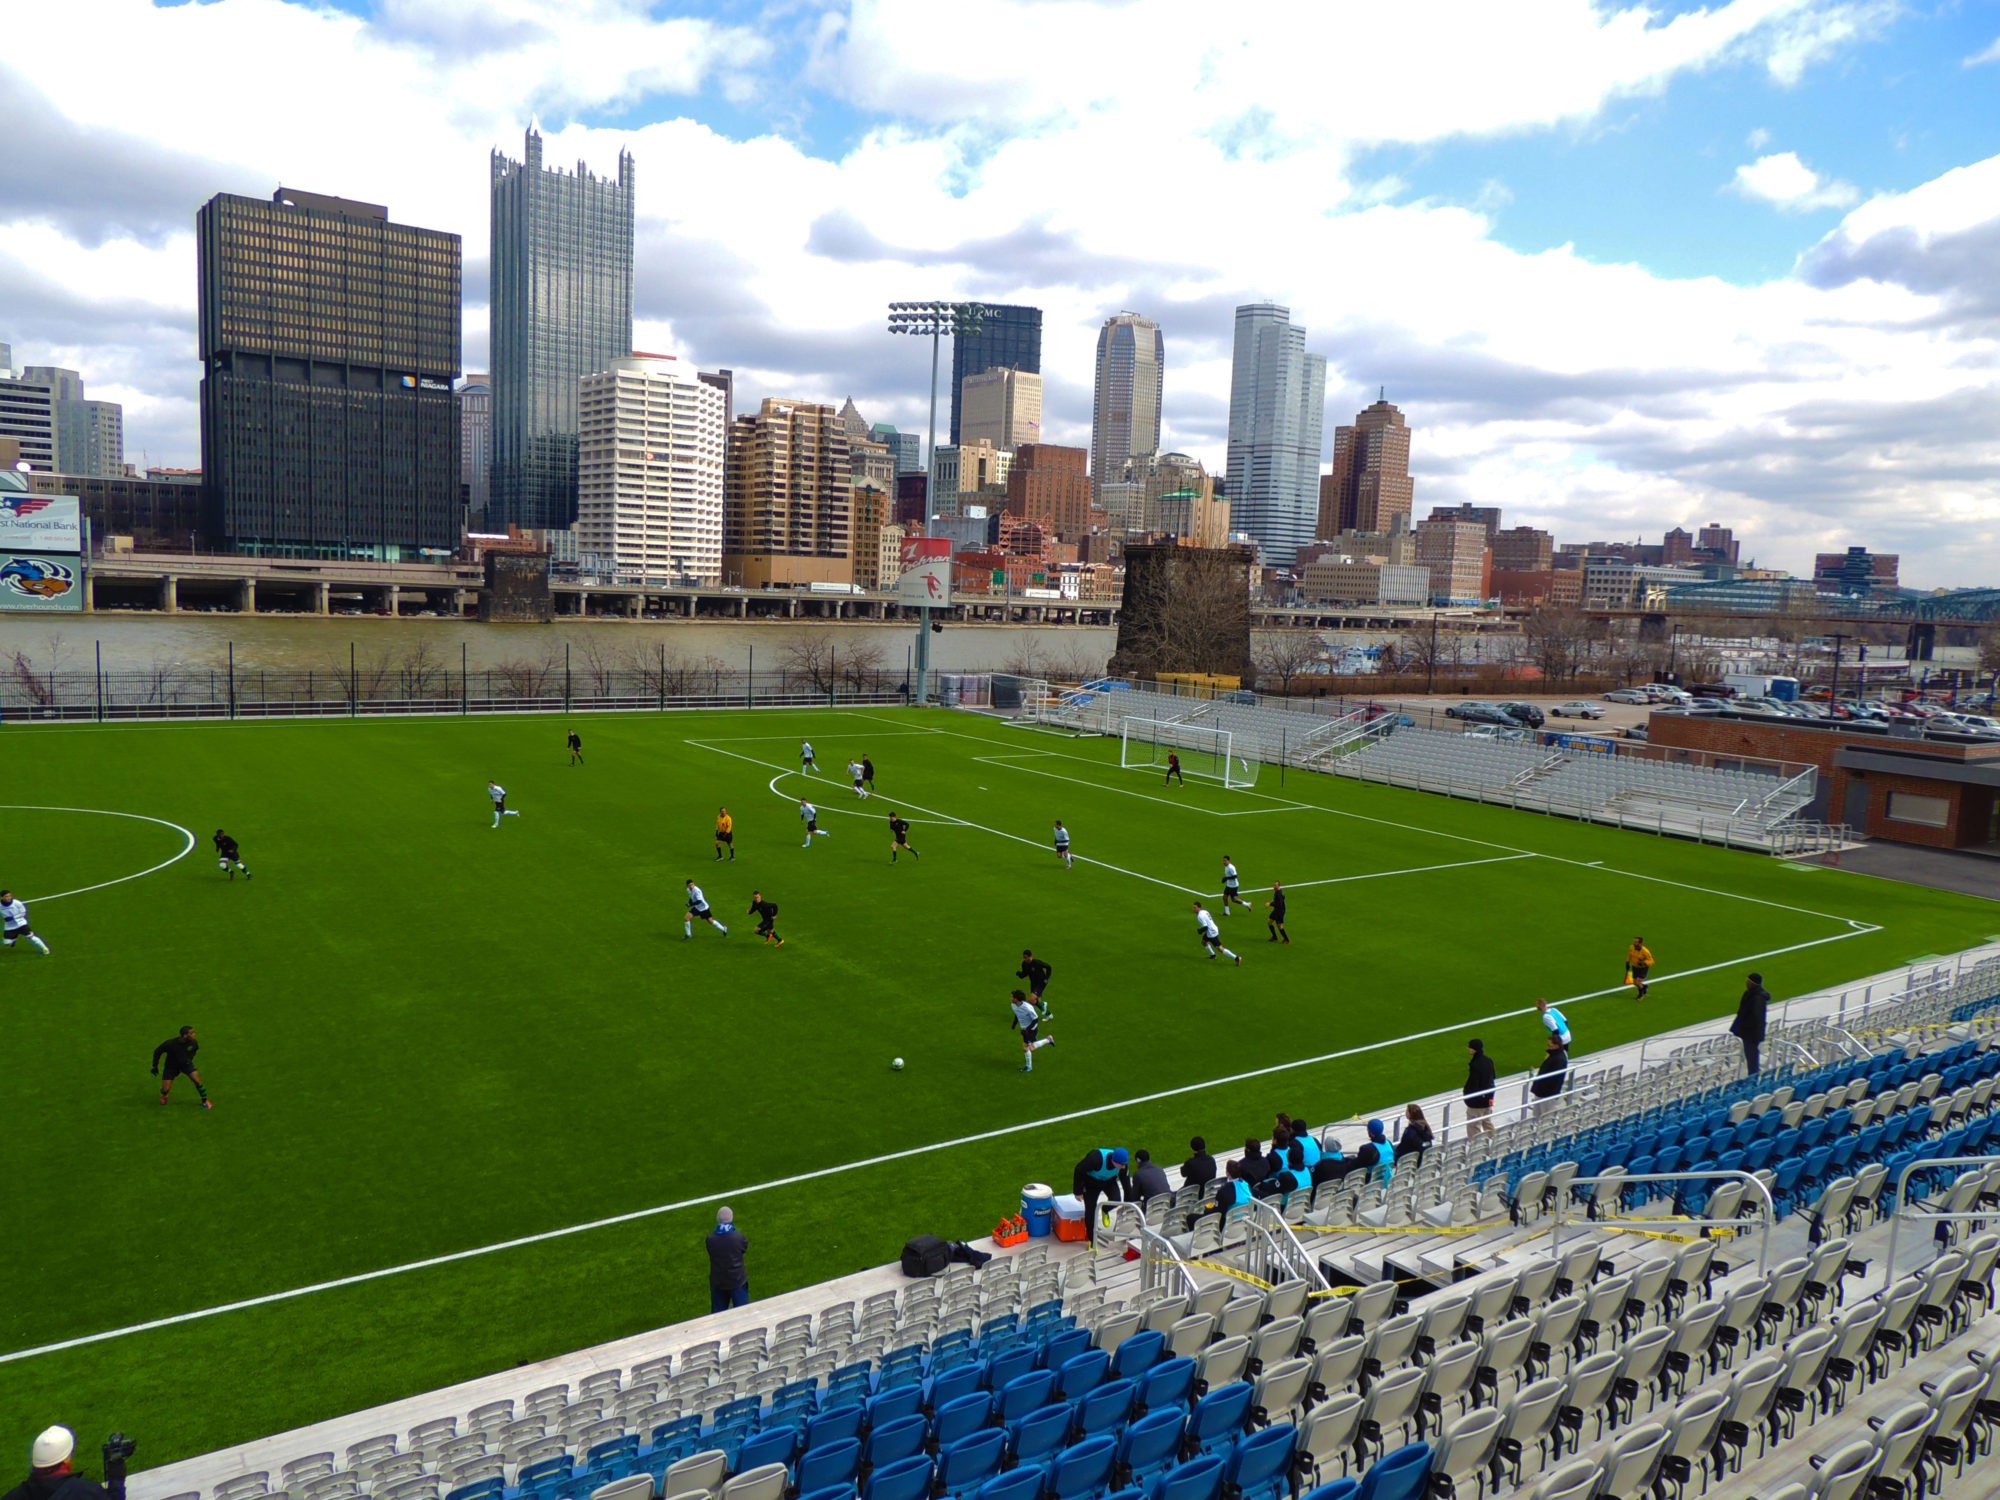 Pittsburgh River Hounds soccer game